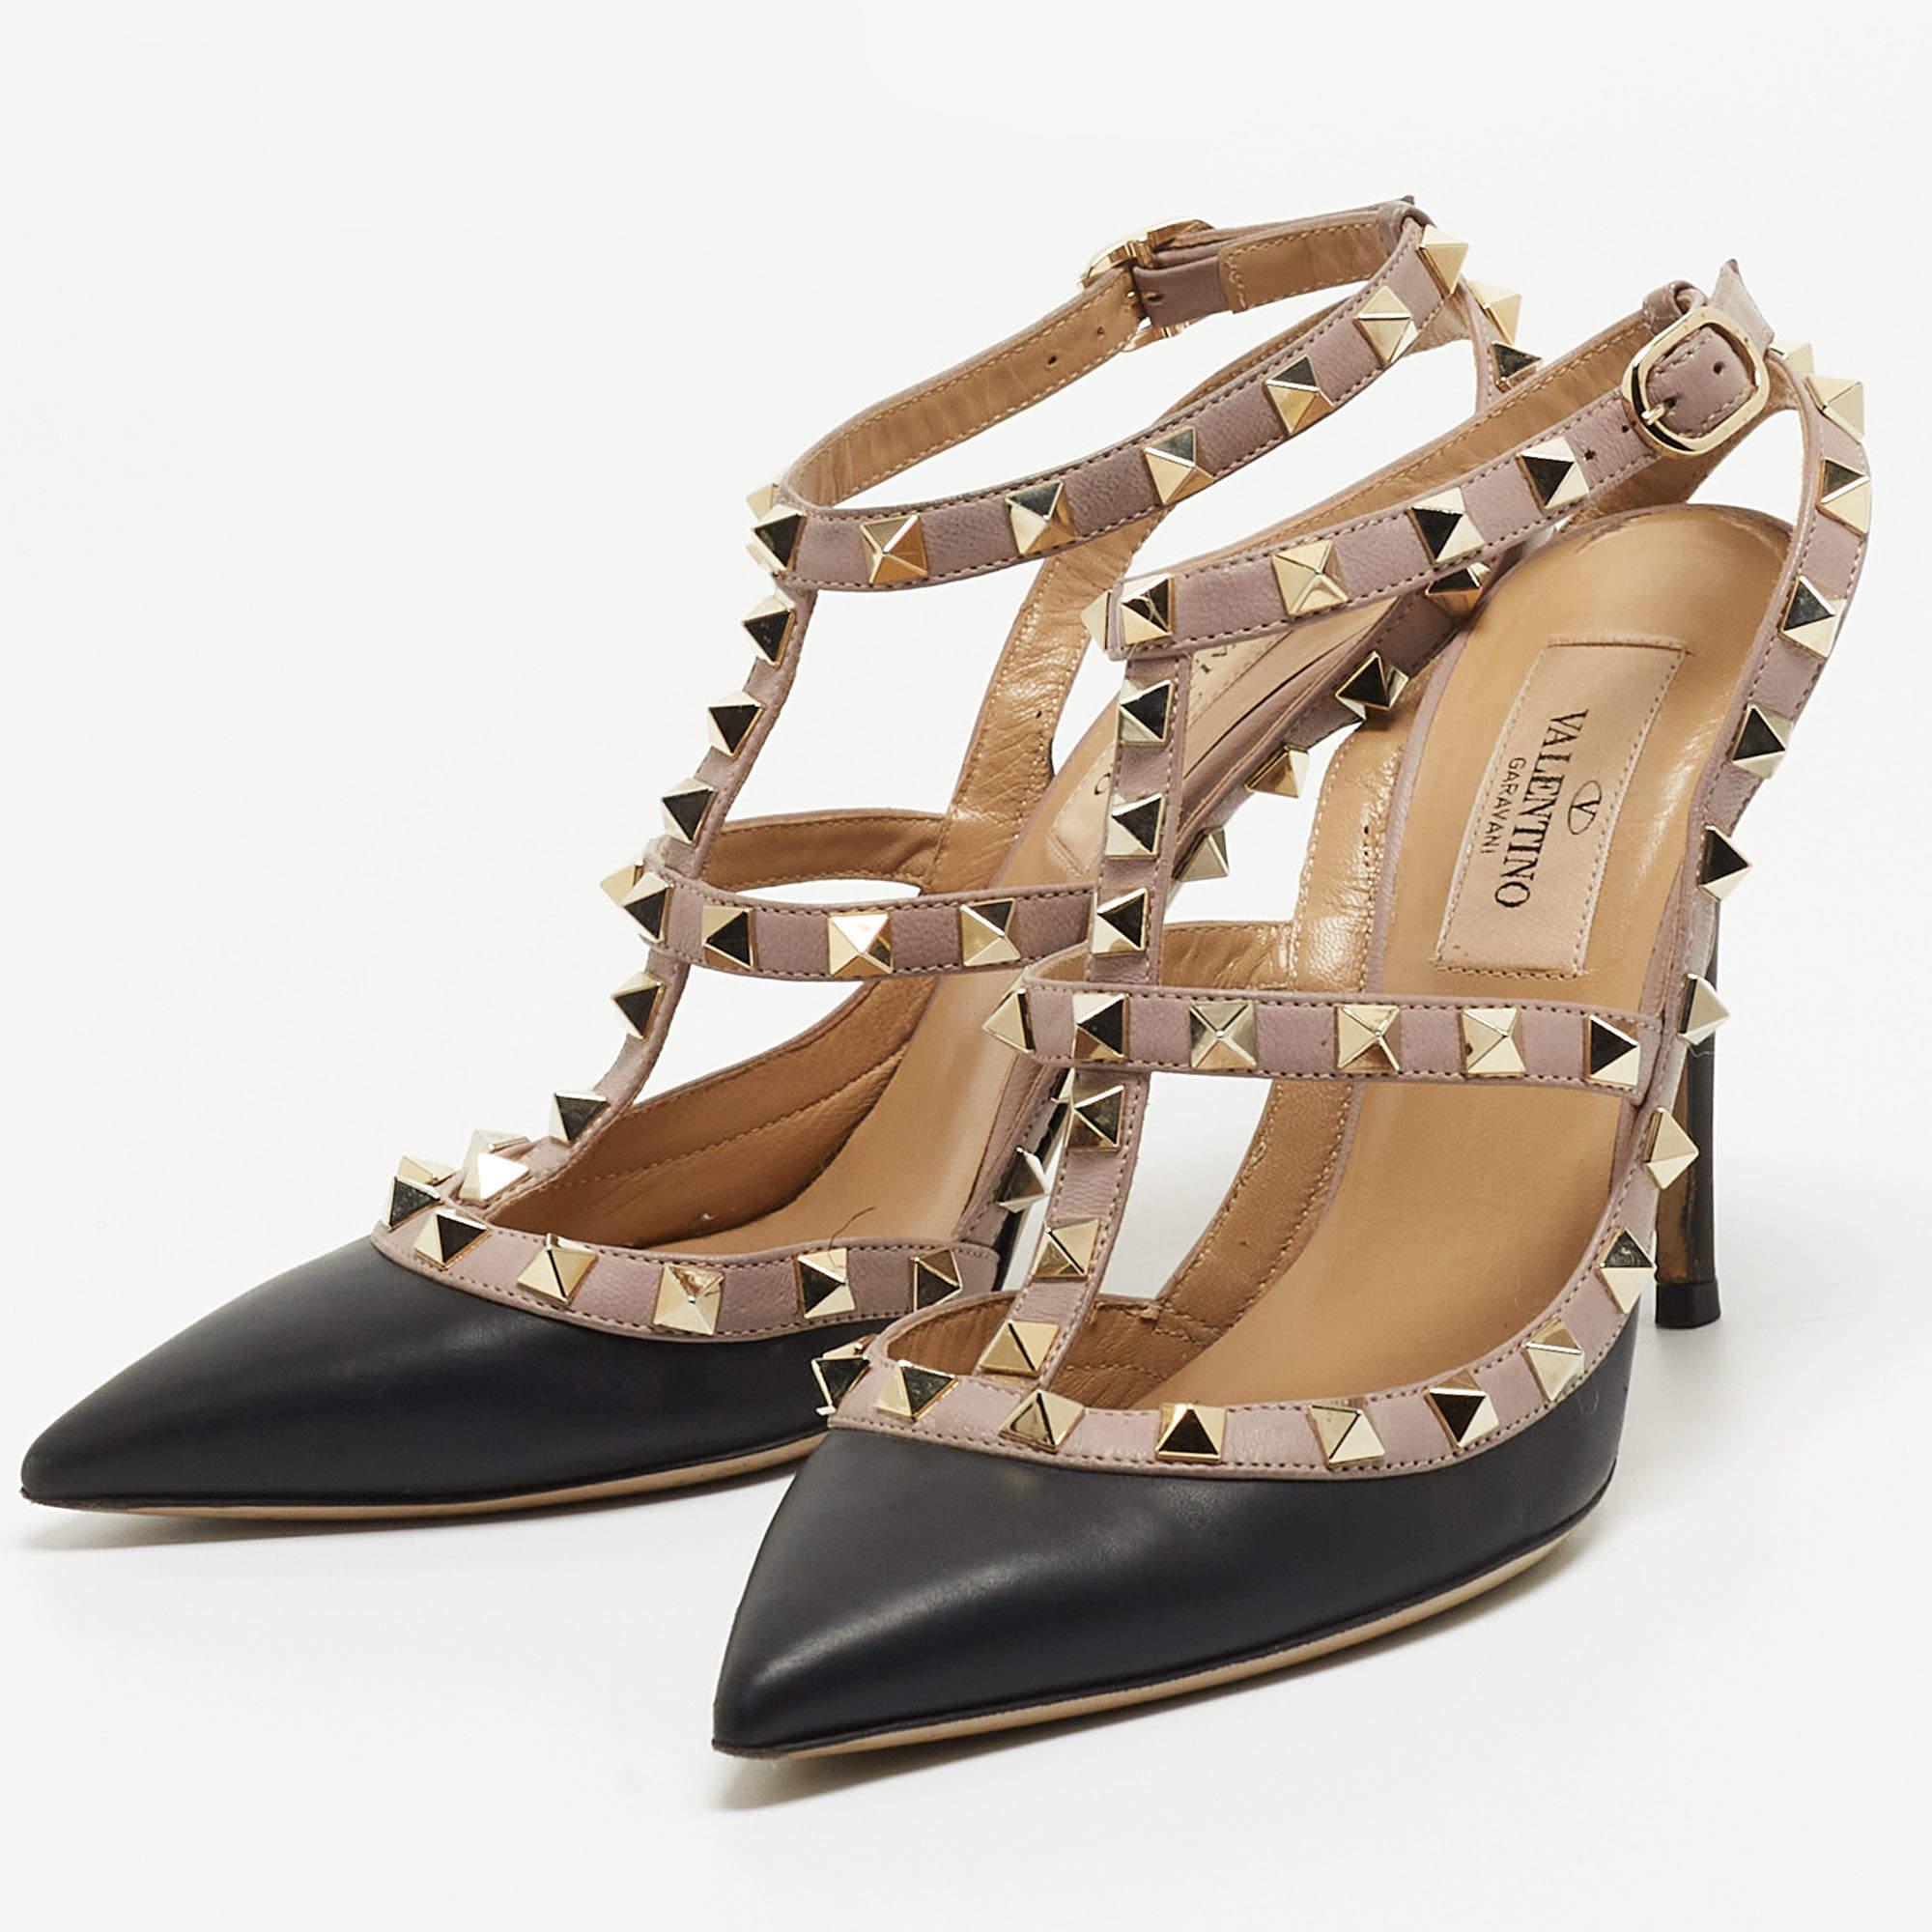 Valentino Black/Beige Leather Rockstud Strappy Pointed Toe Pumps 2